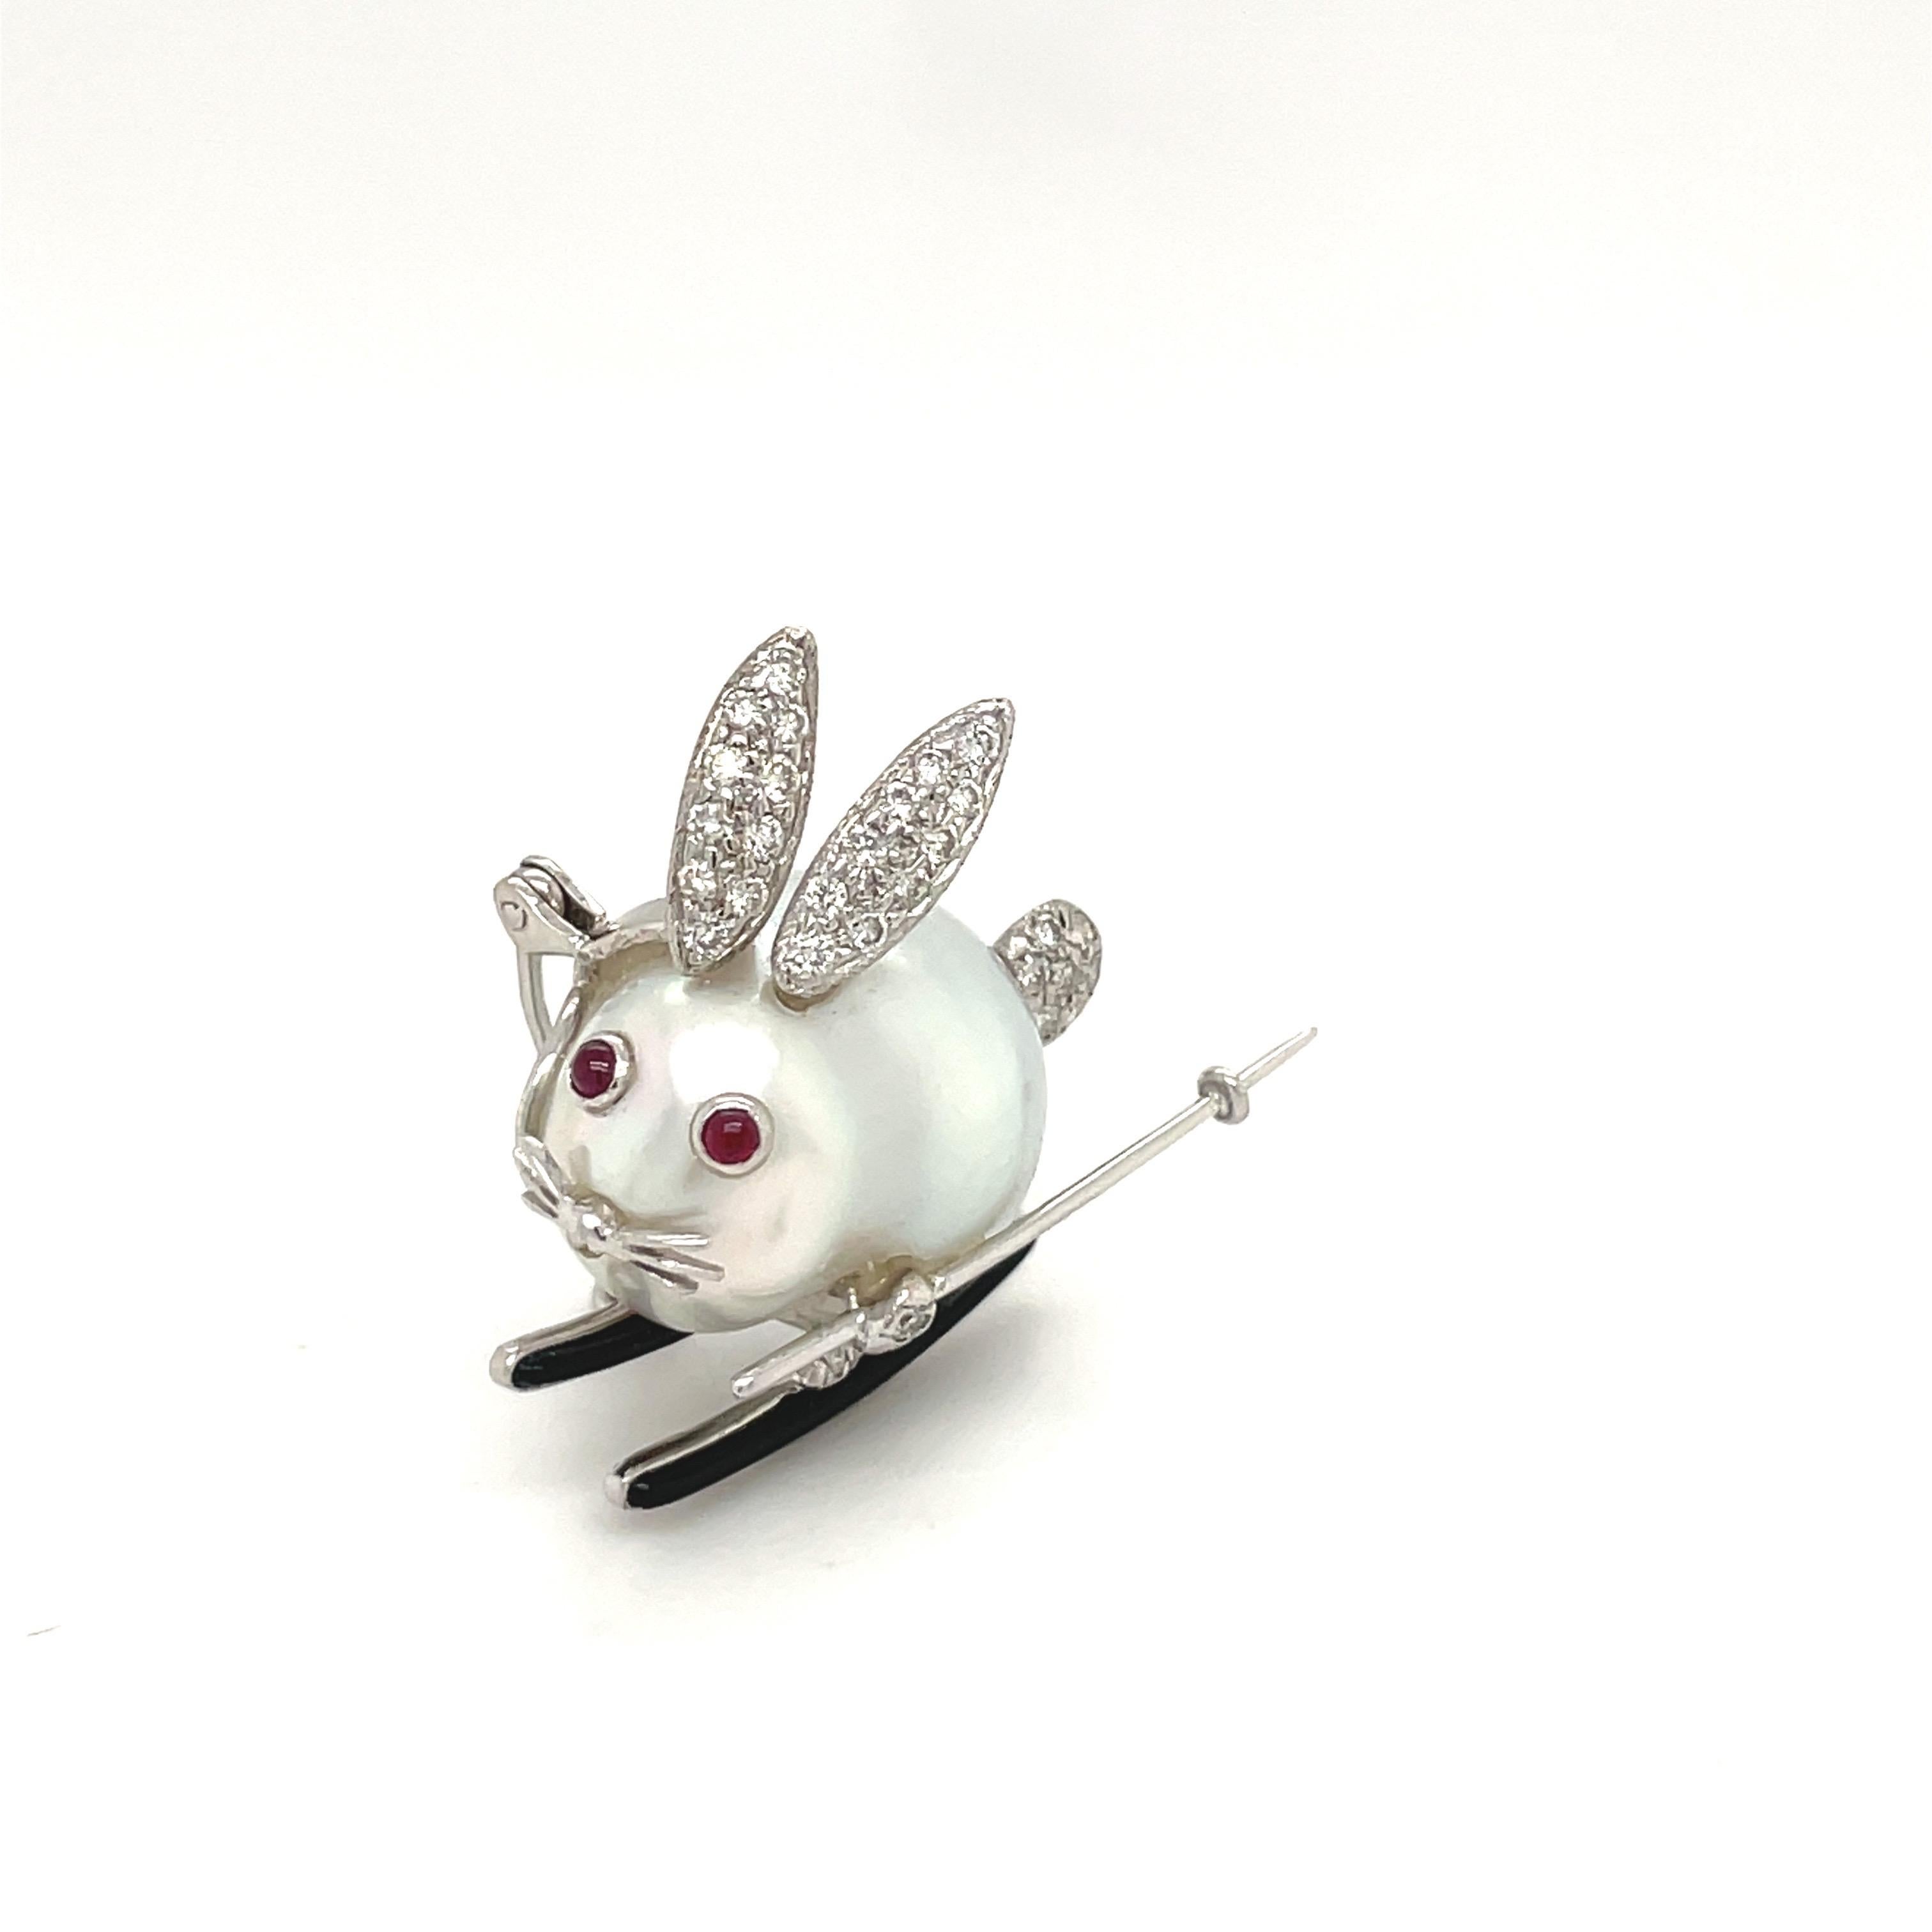 This adorable 18 karat white gold brooch is whimsically designed as a bunny. A 17mm baroque pearl is the body, with pave diamond ears and cabochon ruby eyes. The brooch measures approximately 1